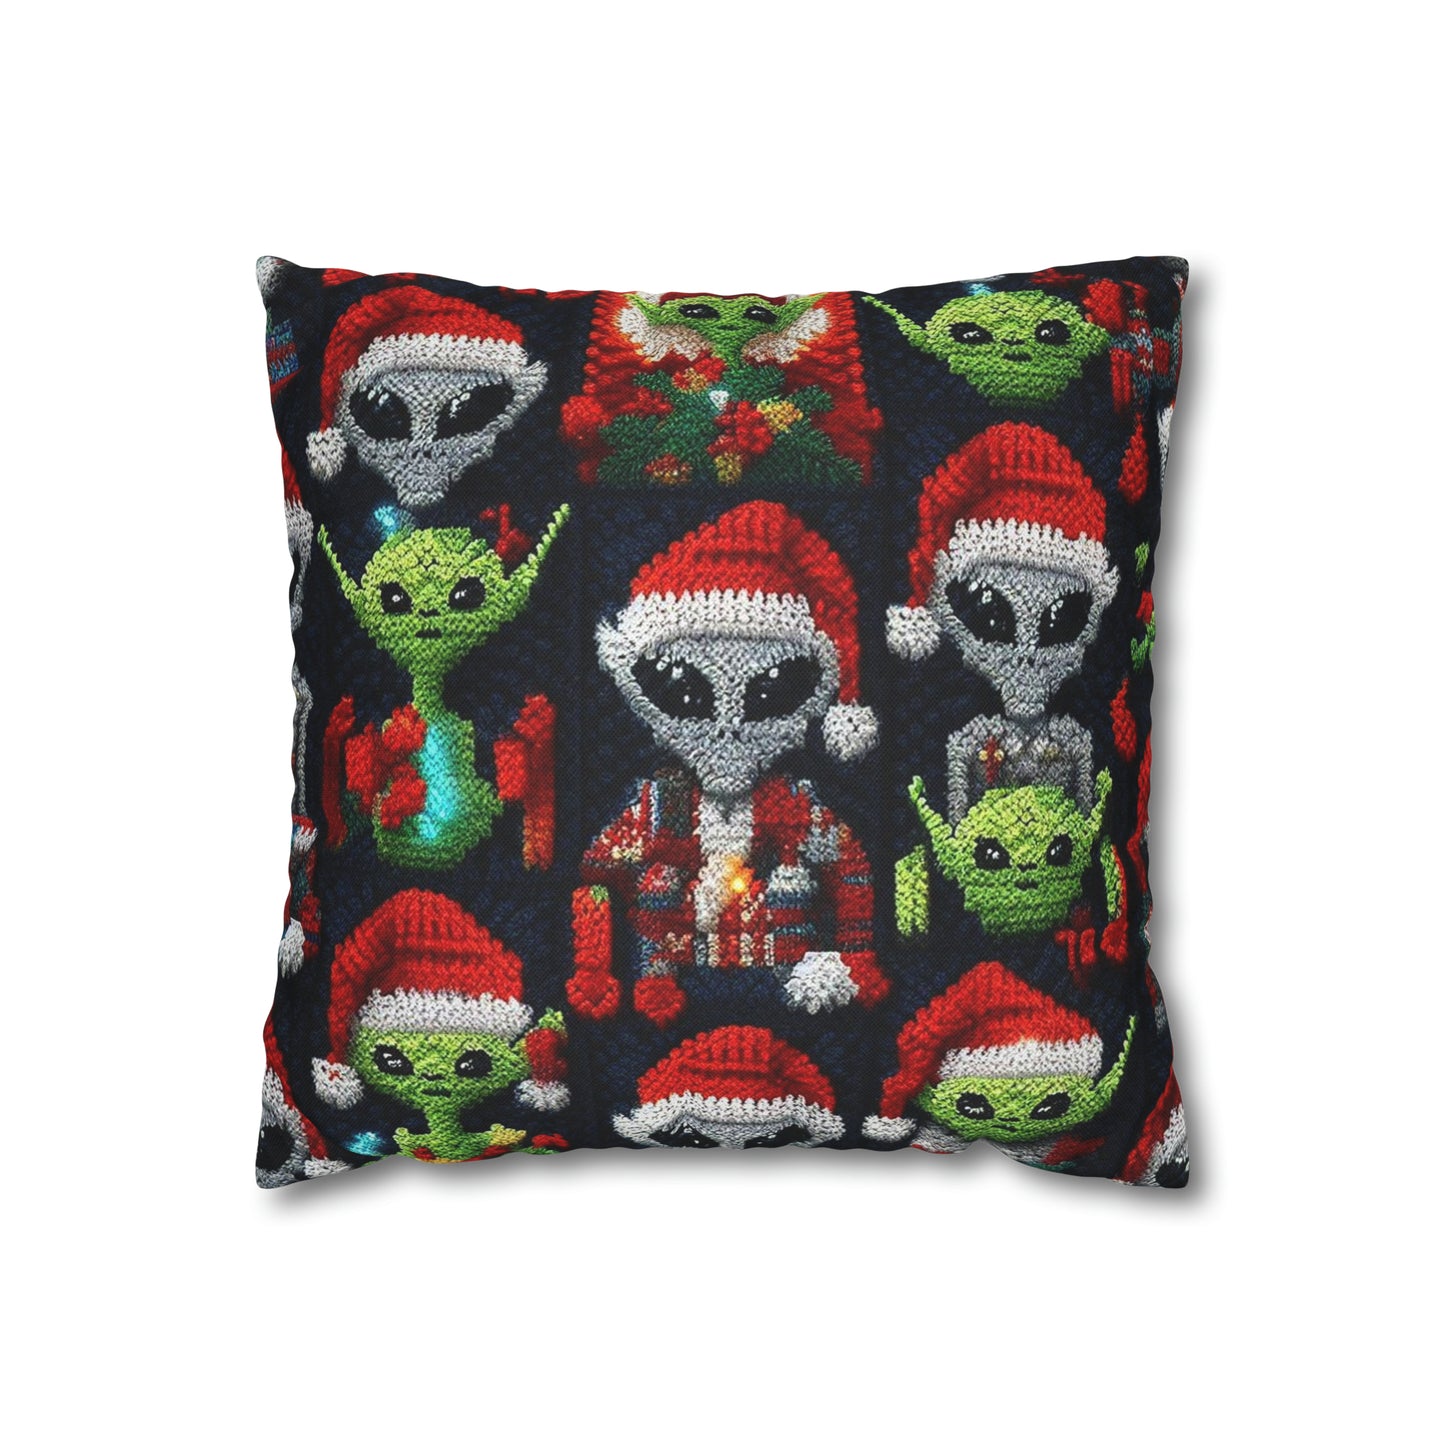 Festive Alien Invasion: Intergalactic Christmas Holiday Cheer with Santa Hats and Seasonal Gifts Crochet Pattern - Spun Polyester Square Pillow Case